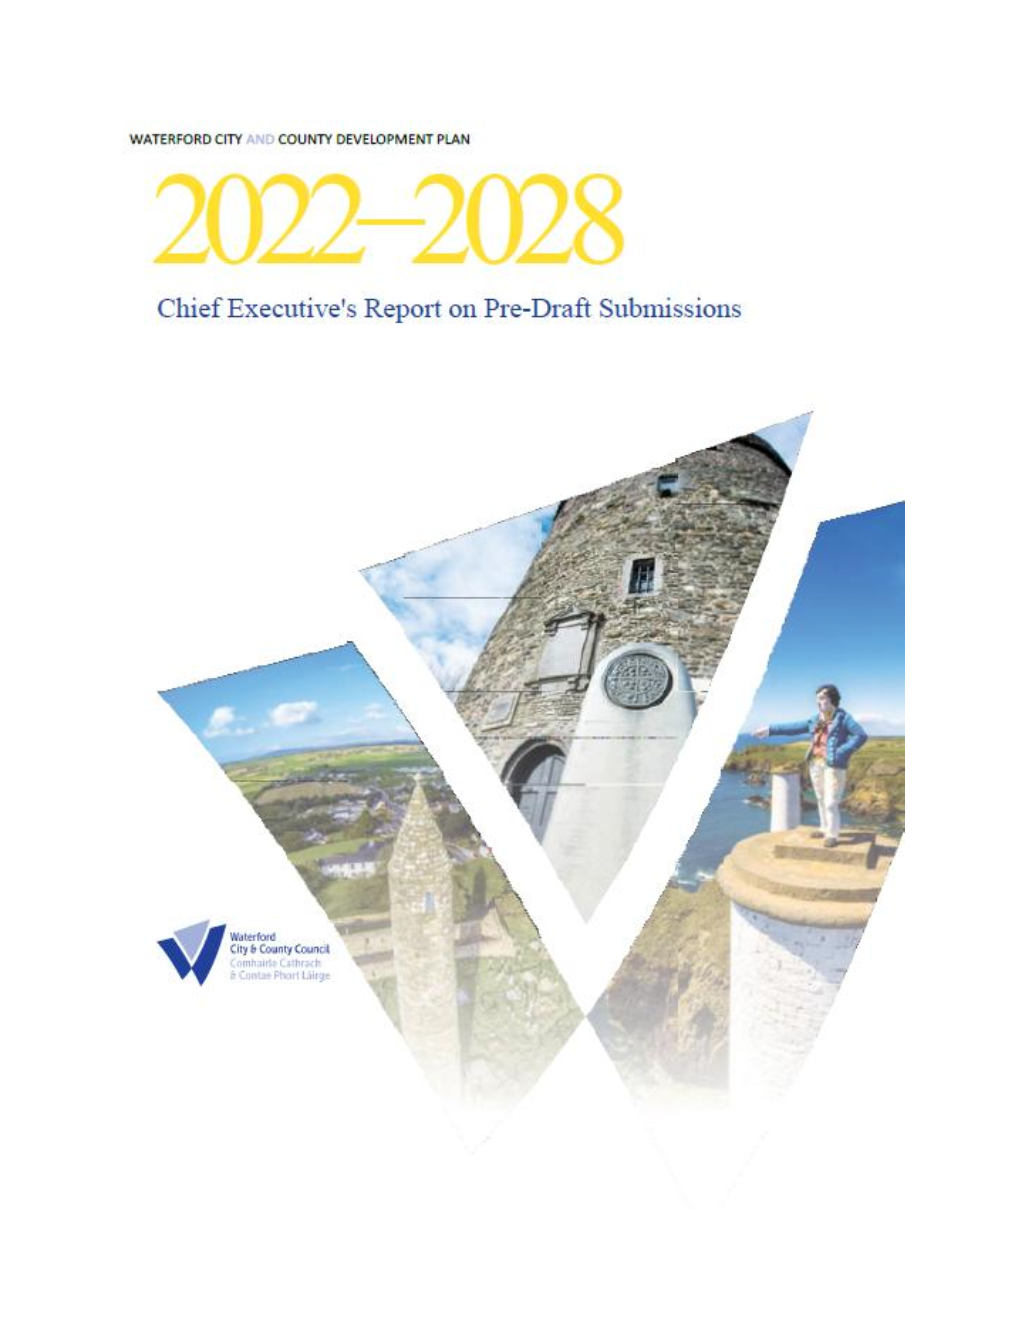 CE Report on Pre-Draft Submissions Rev 2 05 10 20